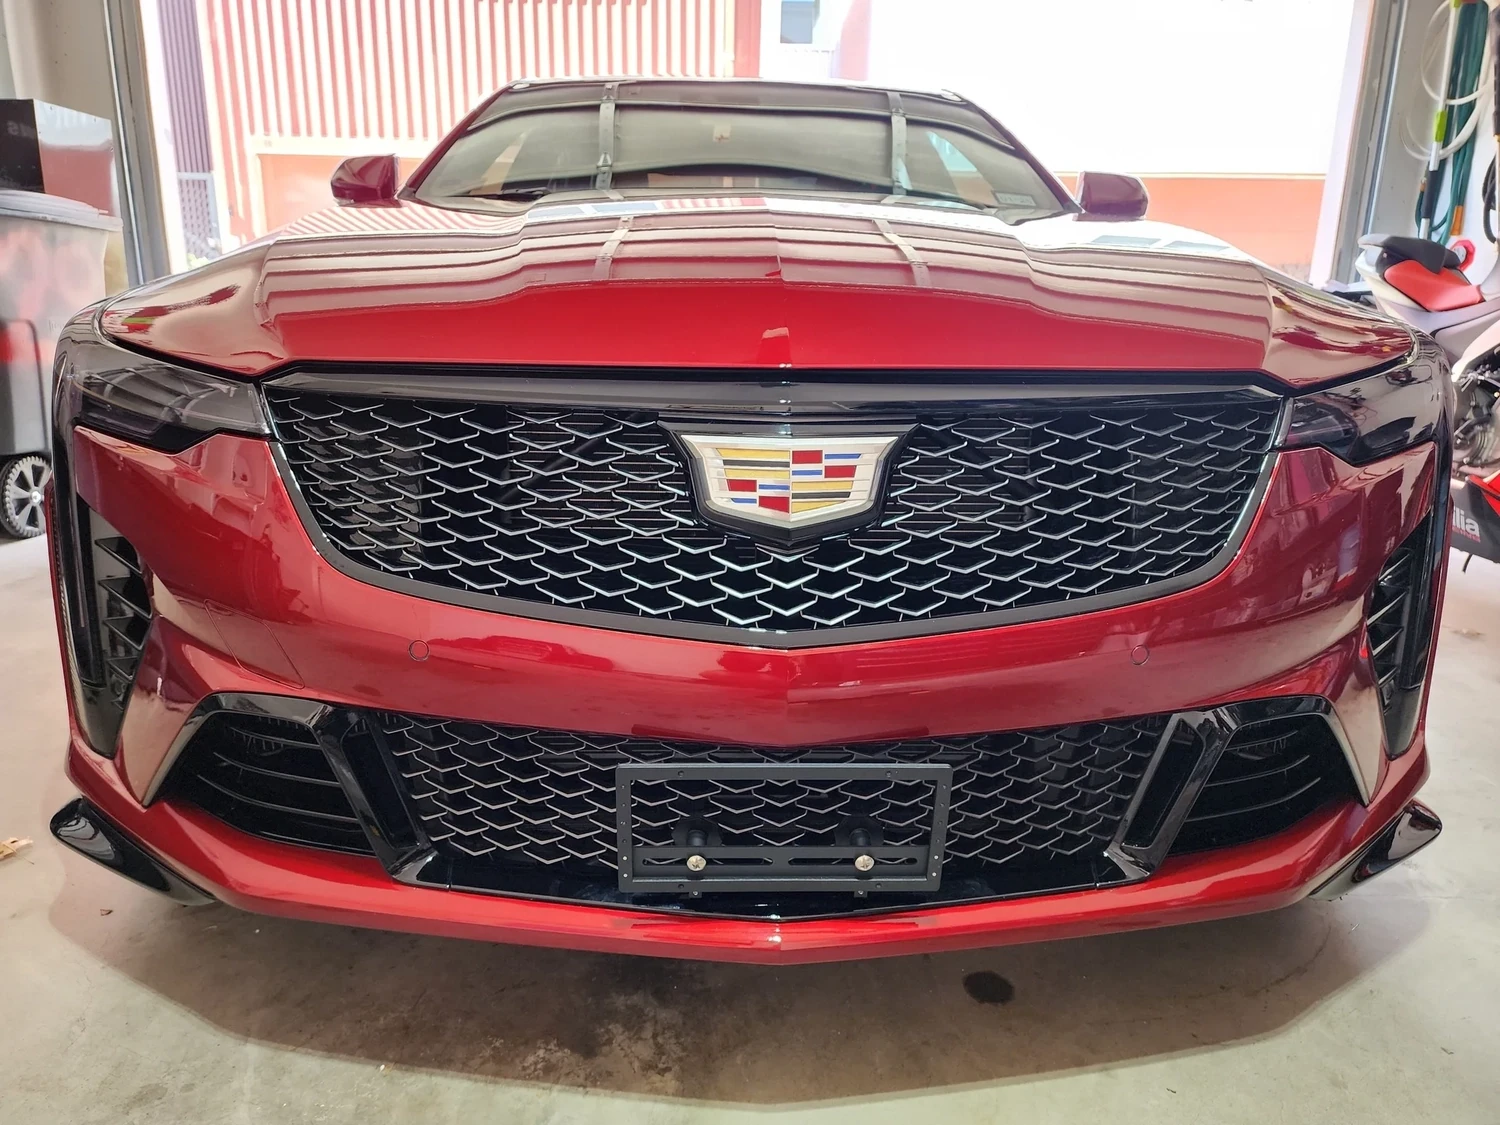 SLY BRACKET FOR CADILLAC CT4 WITH MESH STYLE LOWER GRILLE